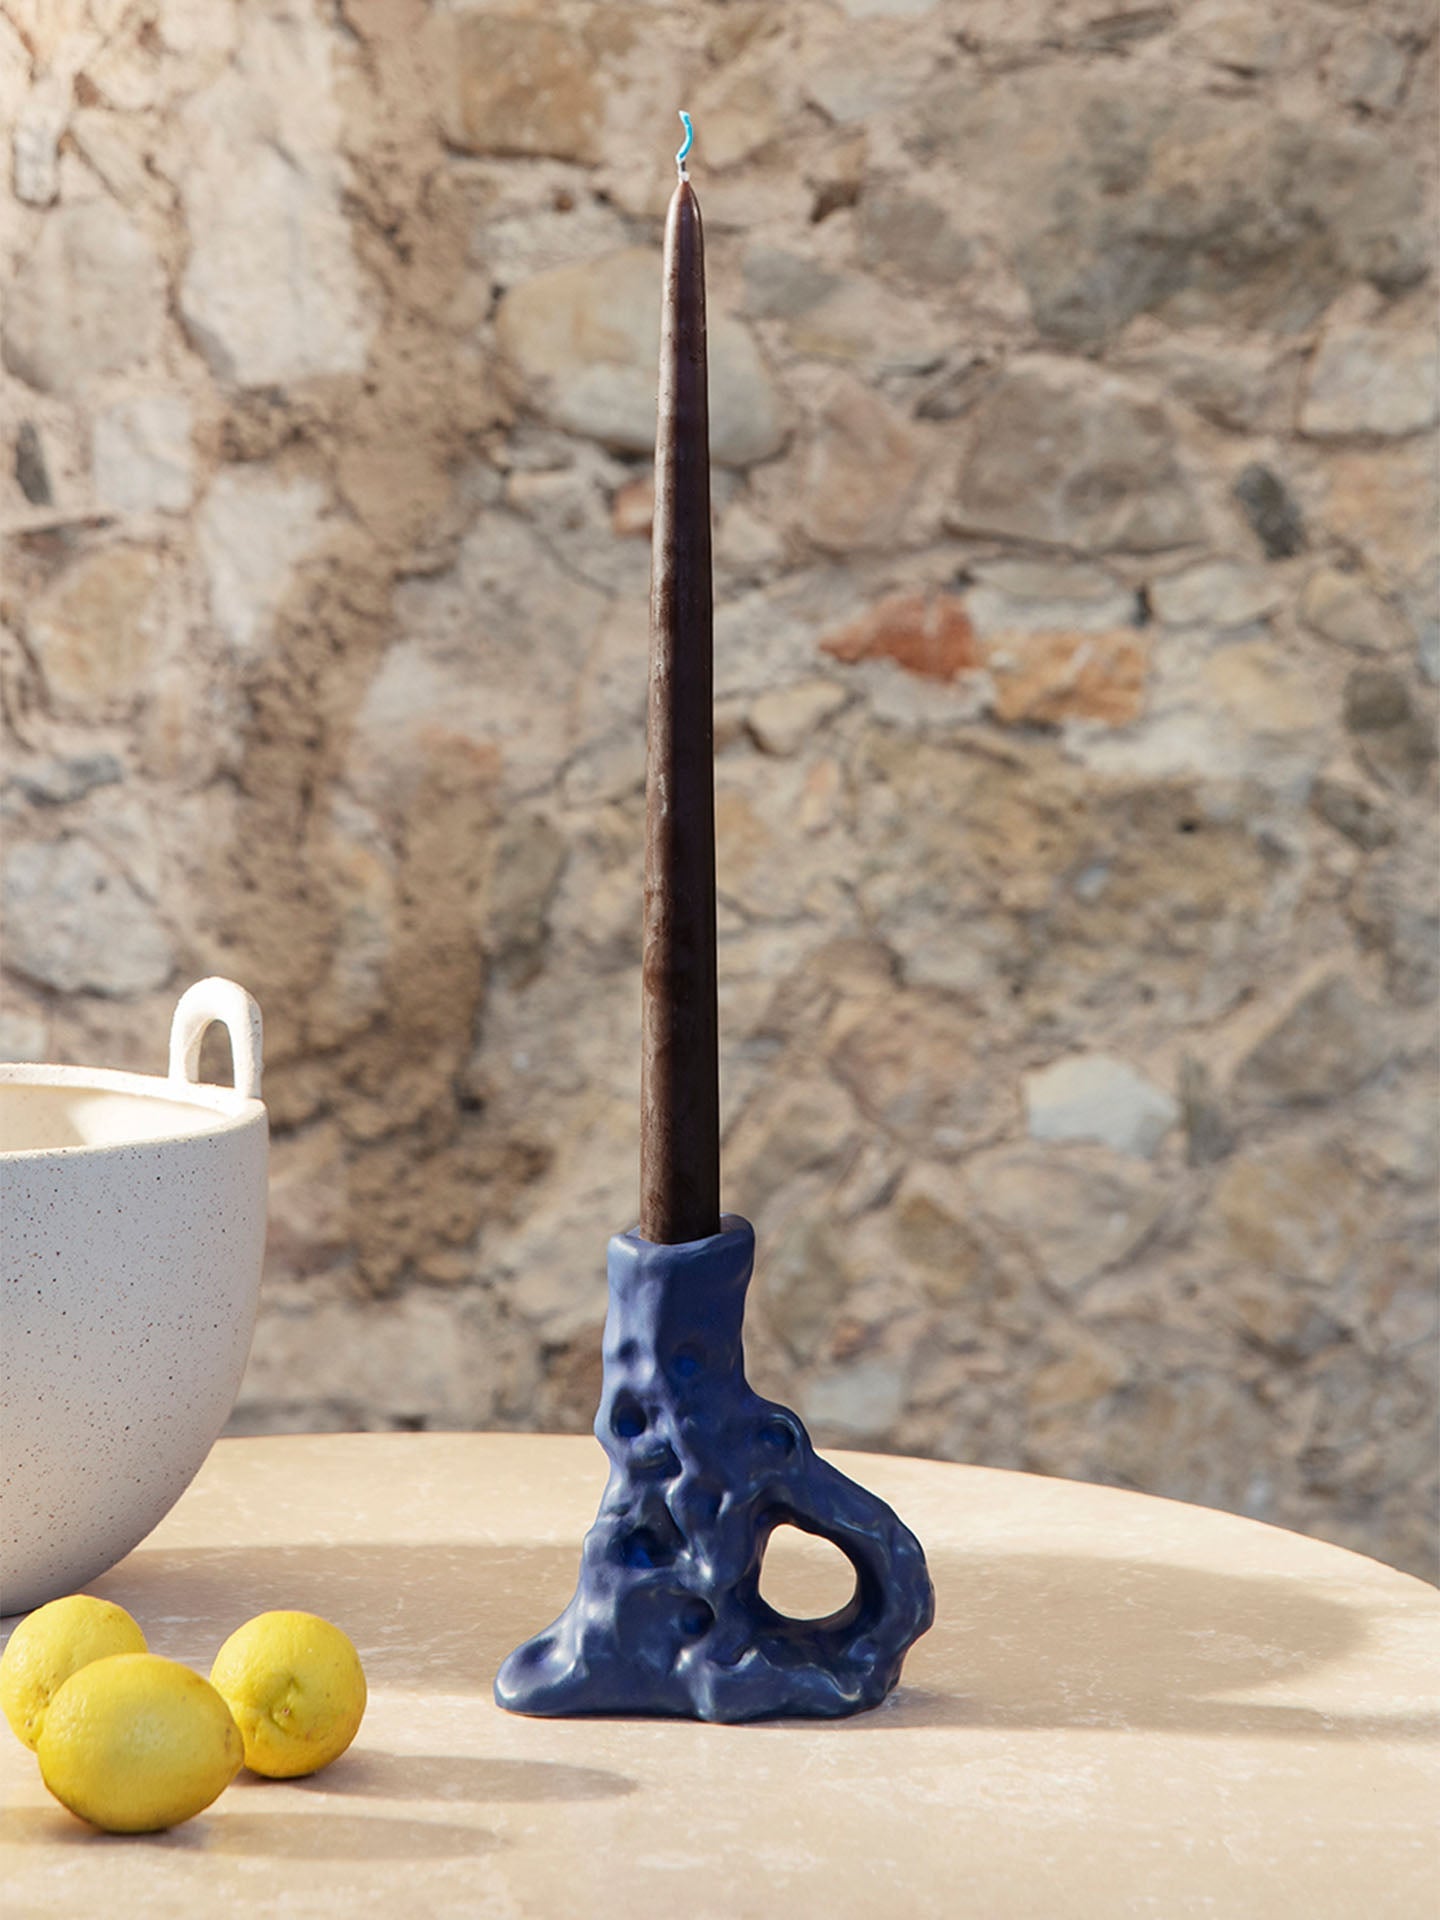 Dito Single Candle Holder - Bright Blue